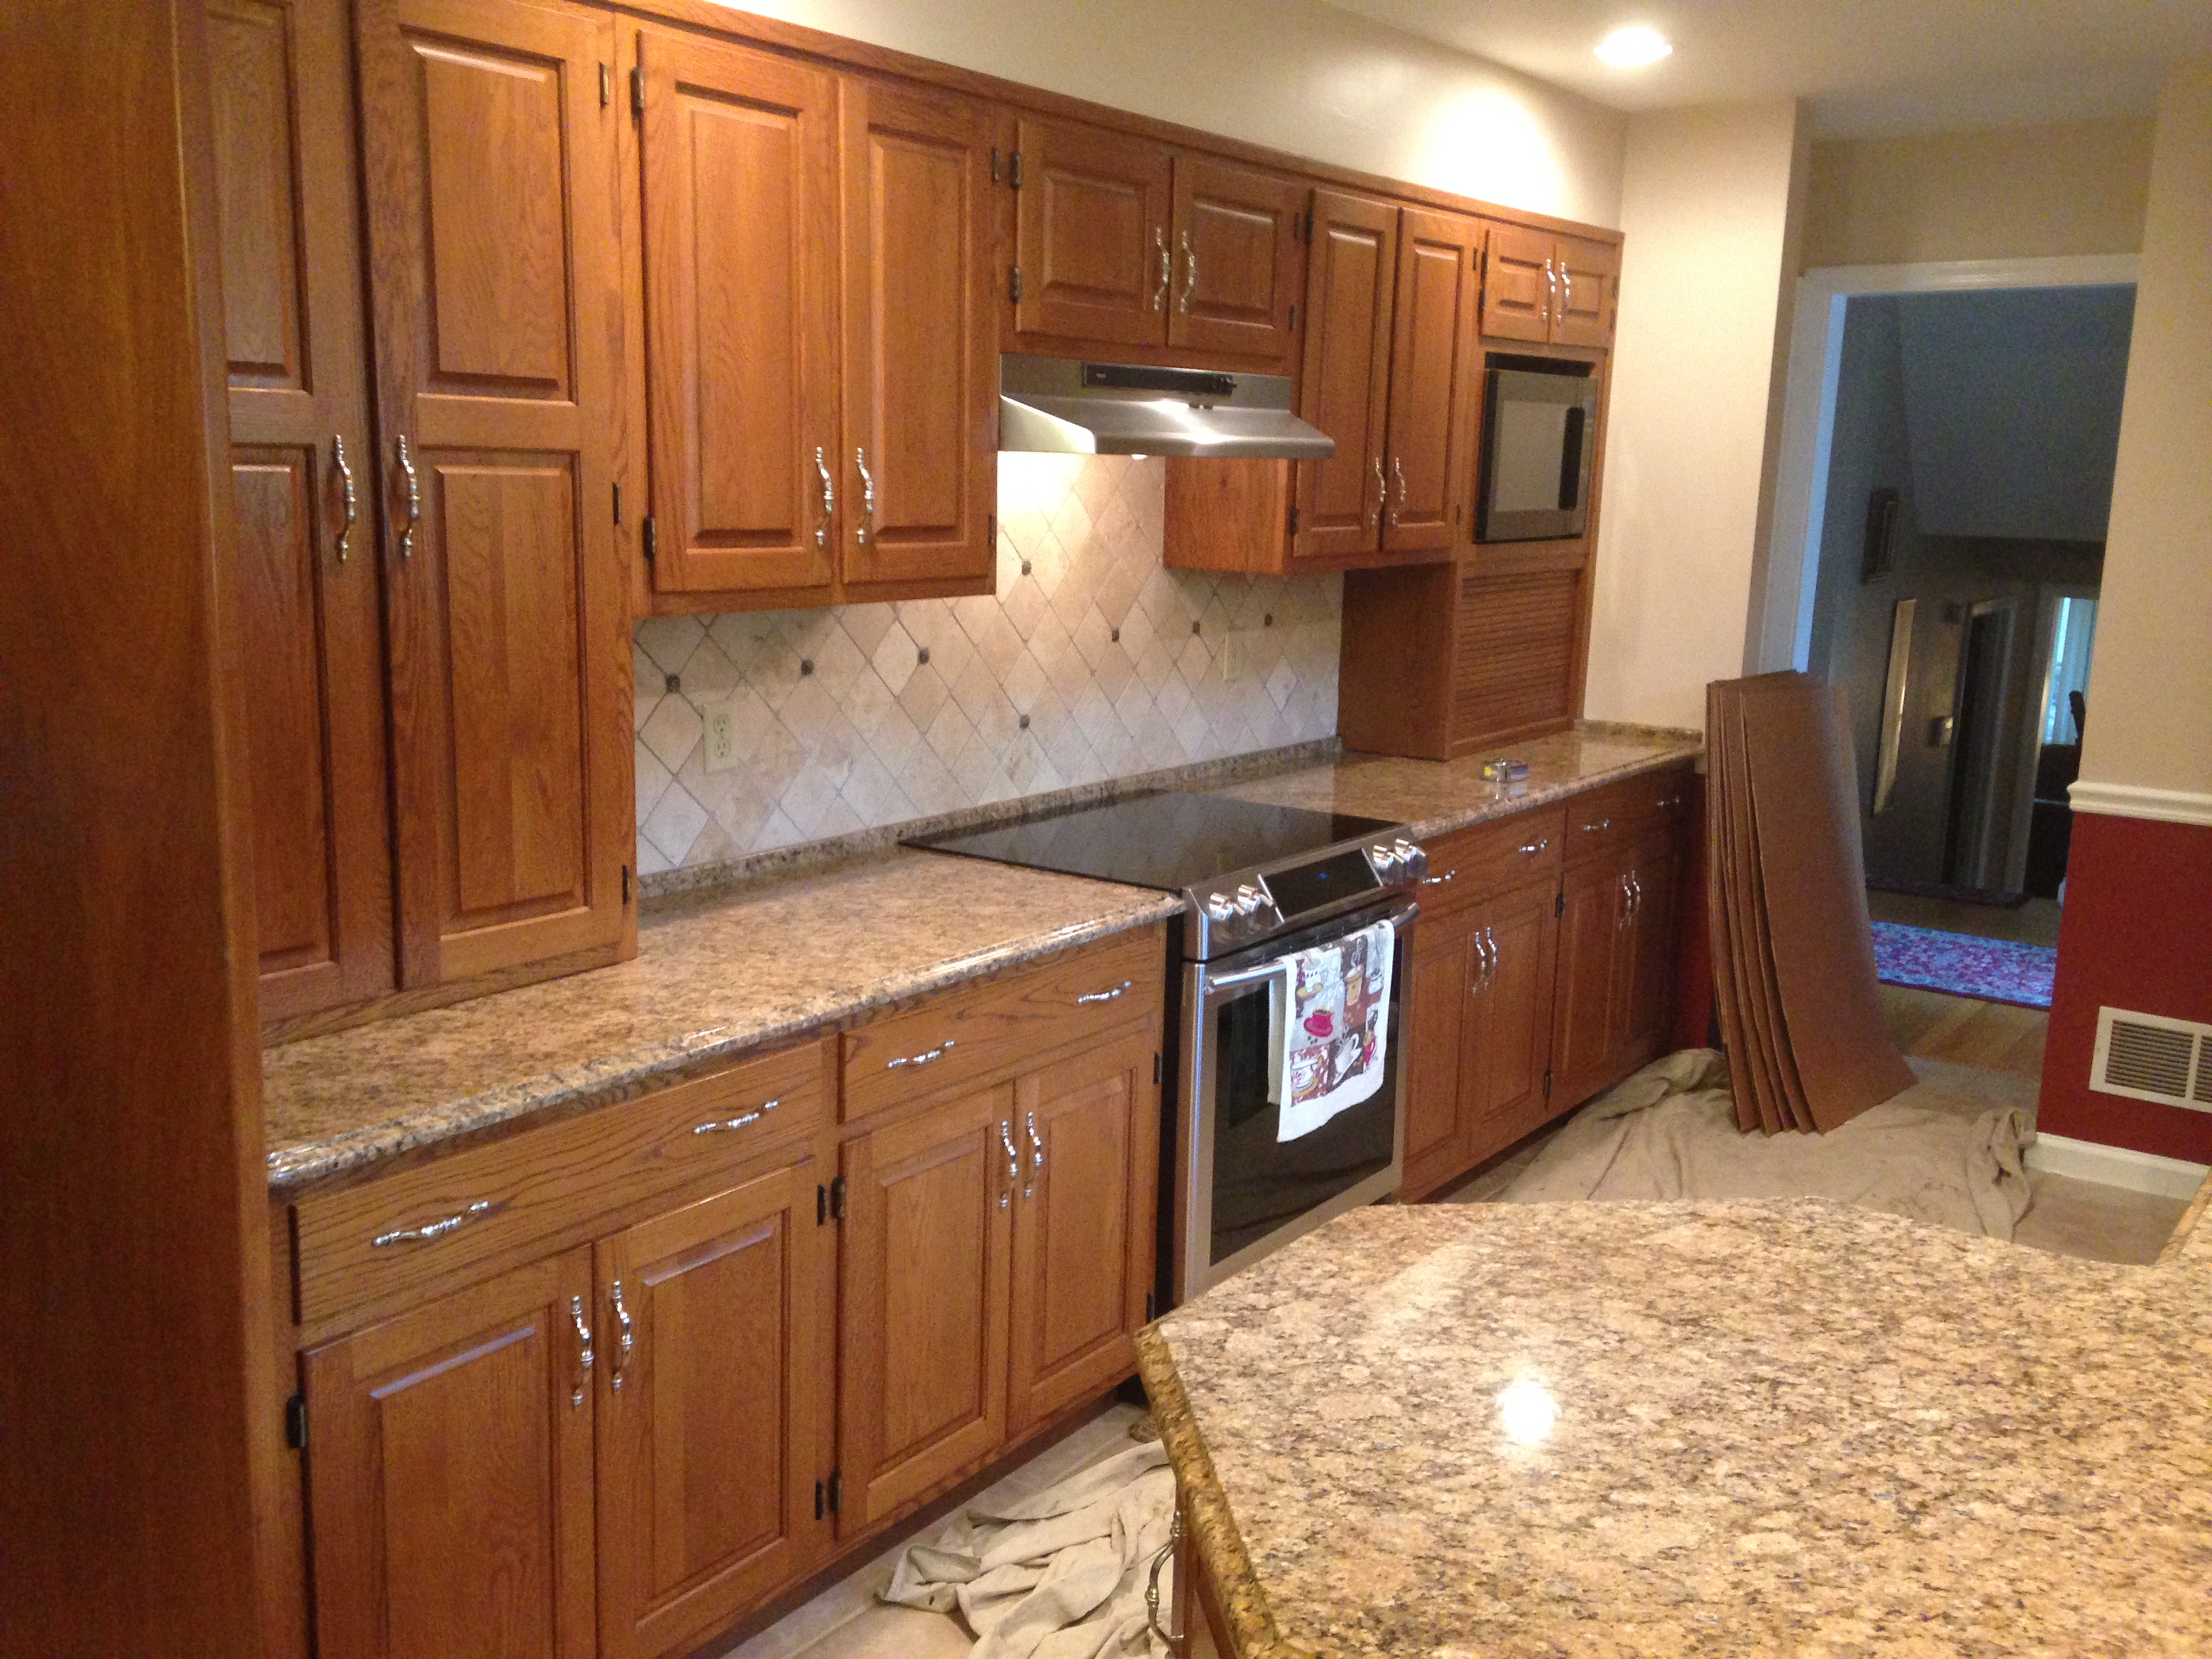 Refacing Dated Oak To Elegant Cherry Capital Kitchen Refacing